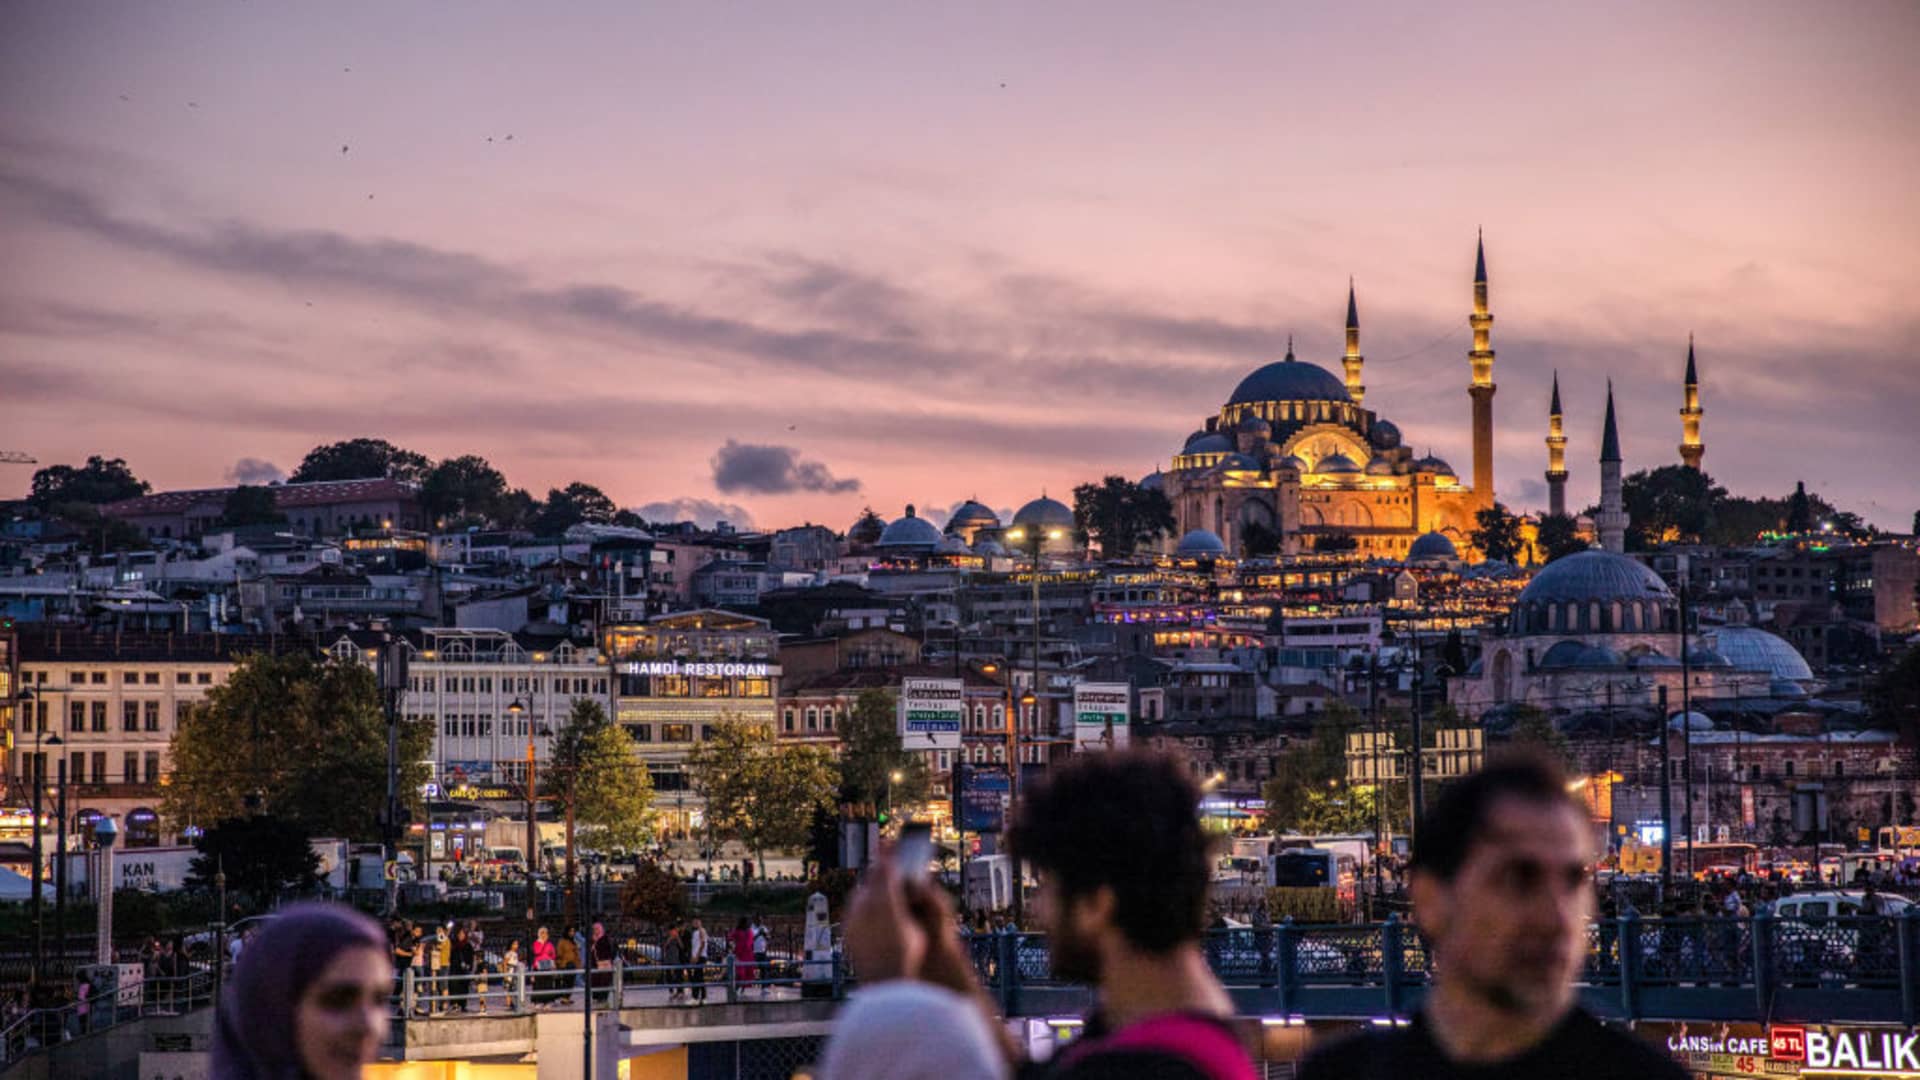 Turkey cuts interest rates again as country struggles under 80% inflation – CNBC